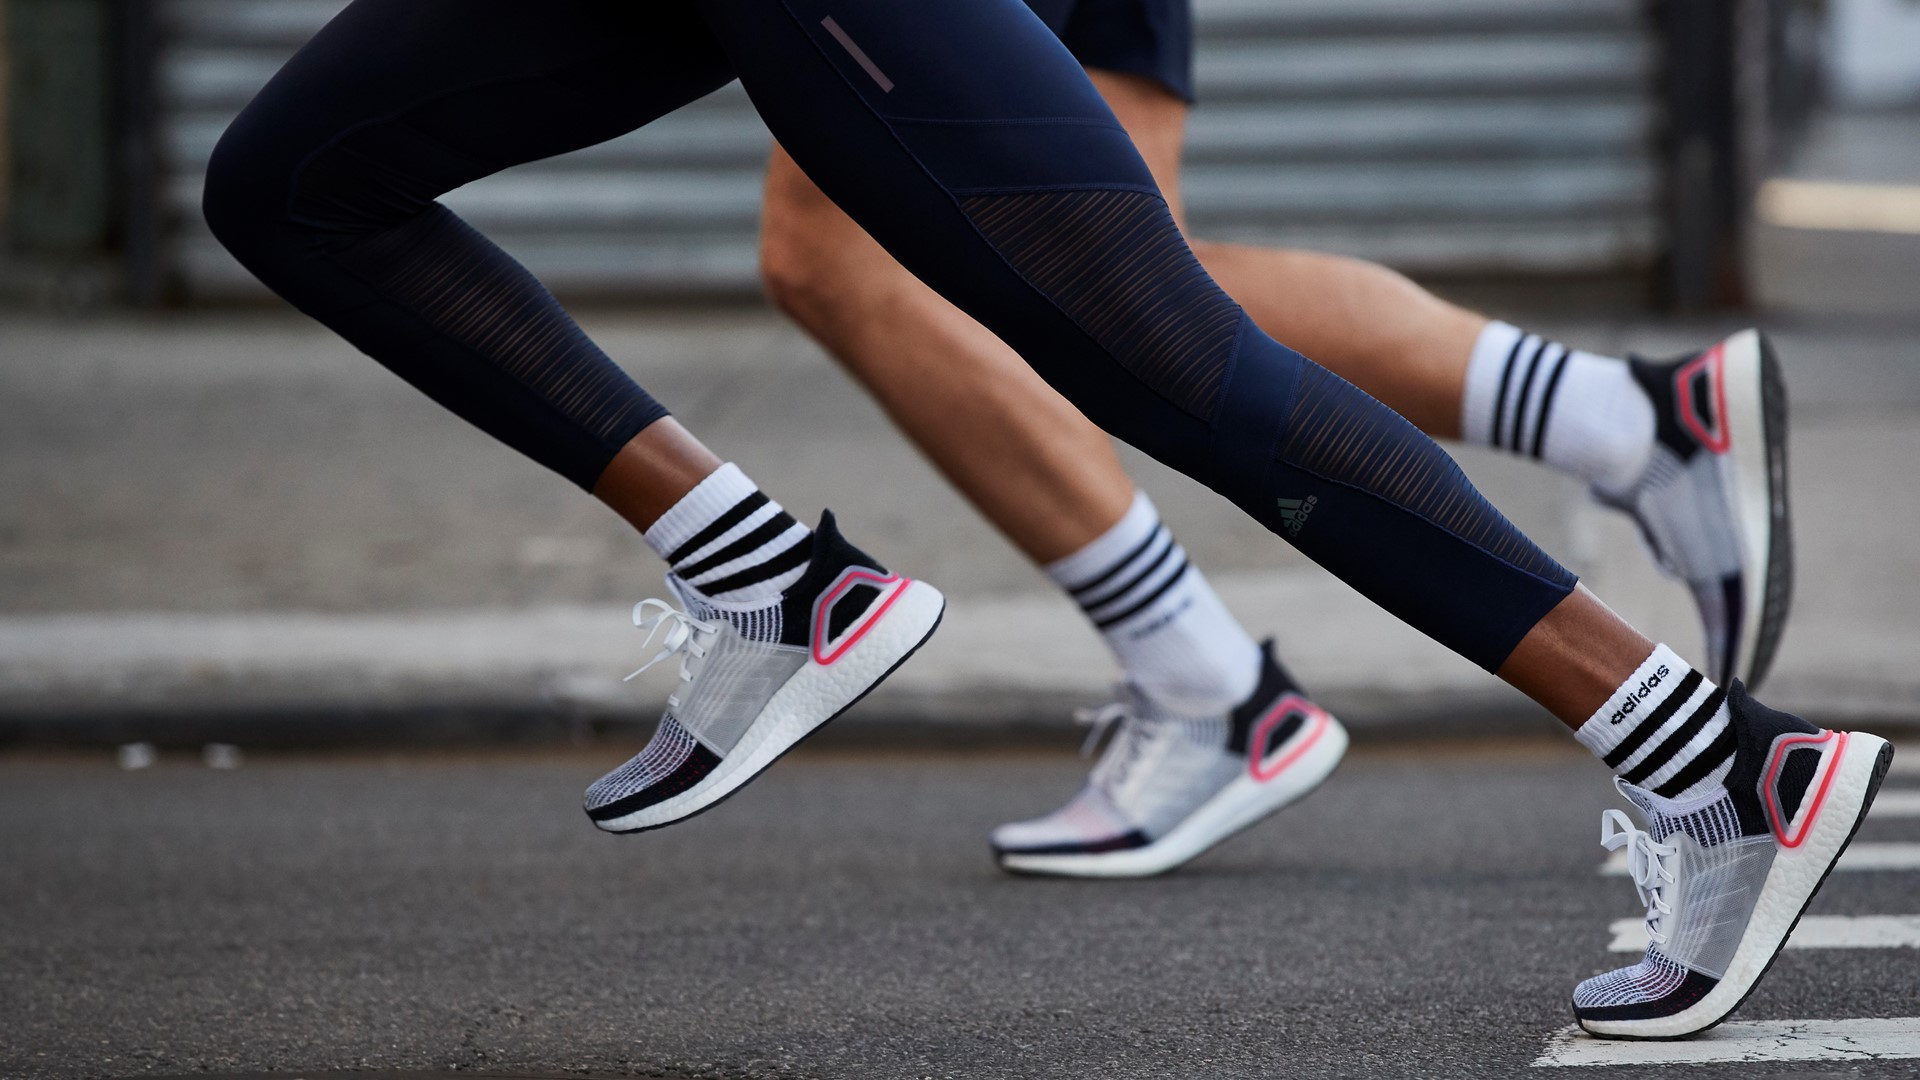 forbi dis smøre adidas works with thousands of runners to create the revolutionary adidas  Ultraboost 19 – a new shoe for a new sport